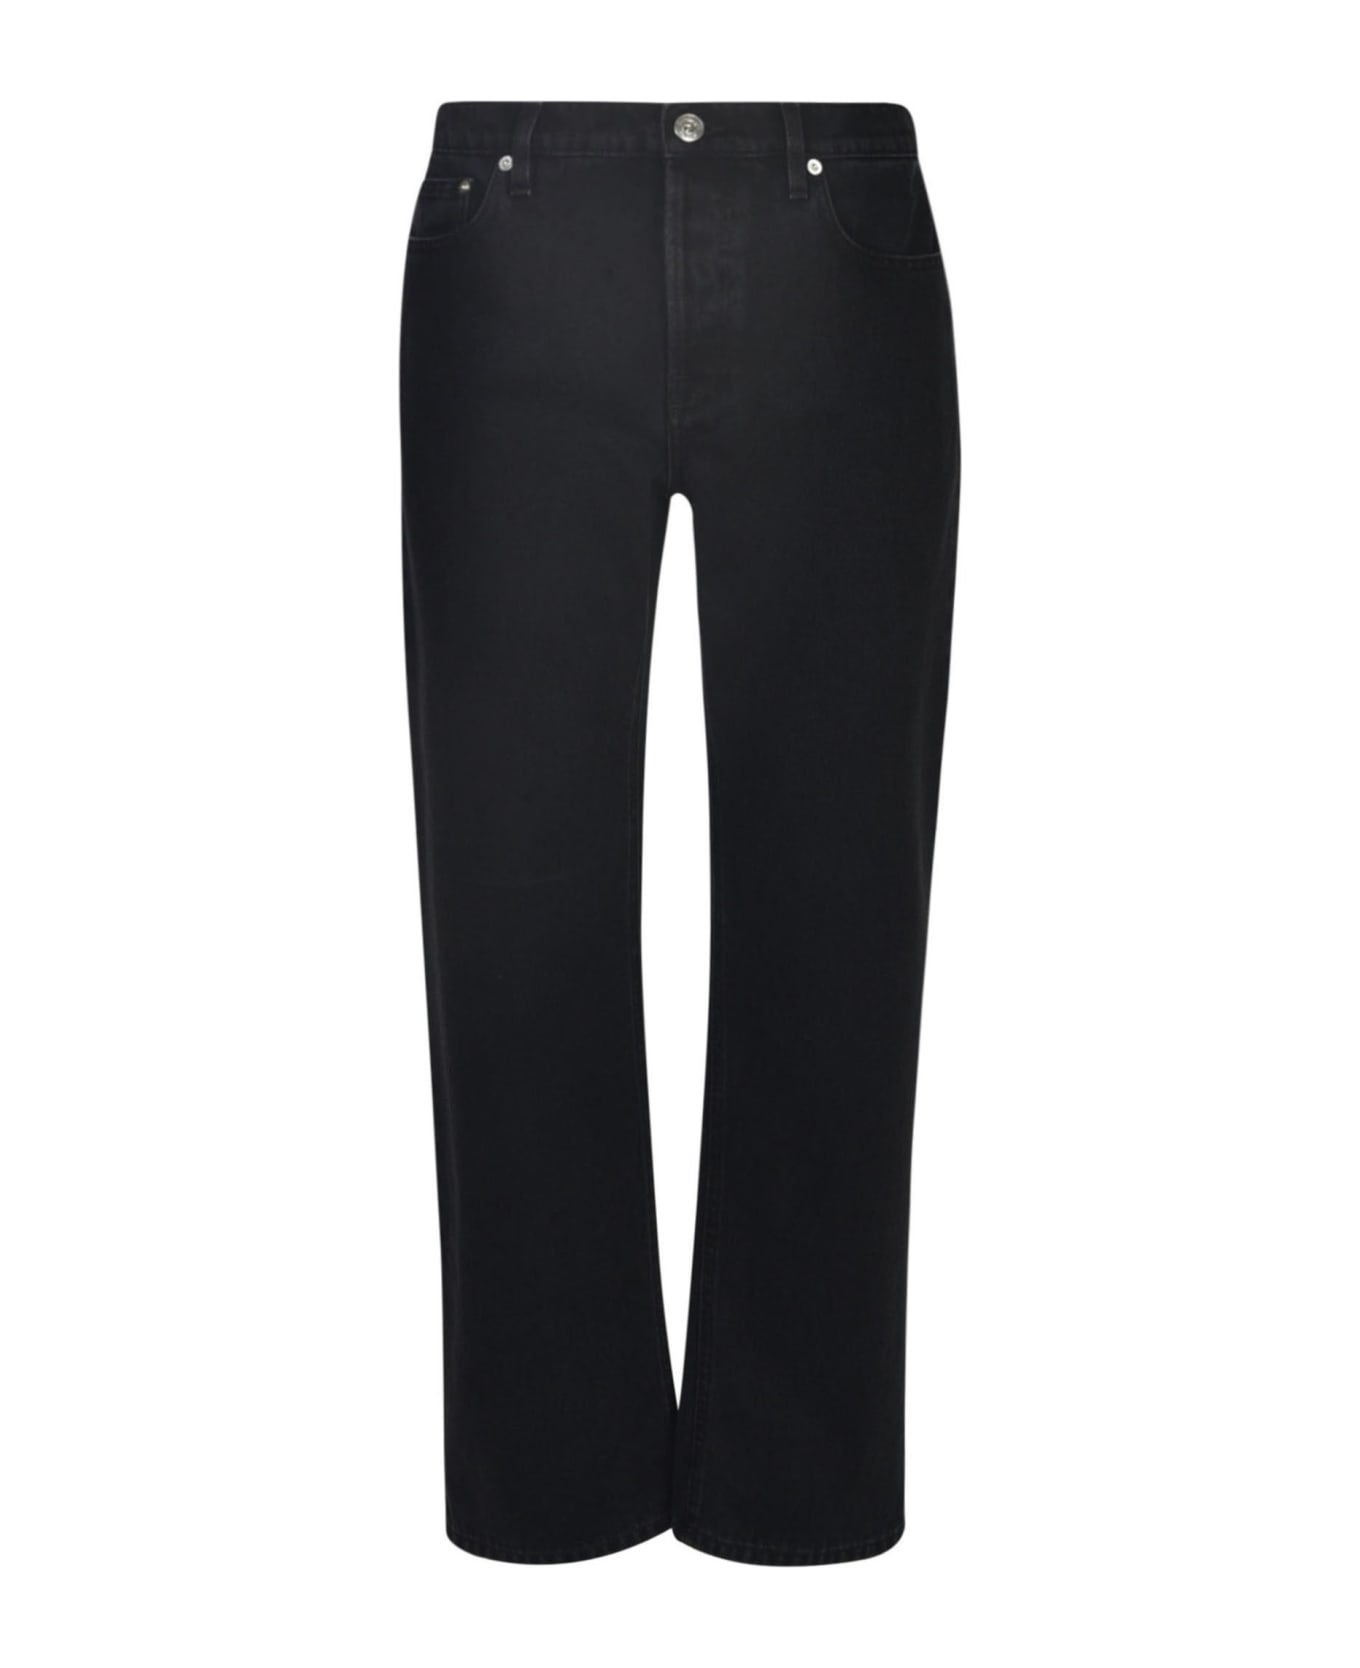 Lanvin Buttoned Classic Jeans - Black ボトムス